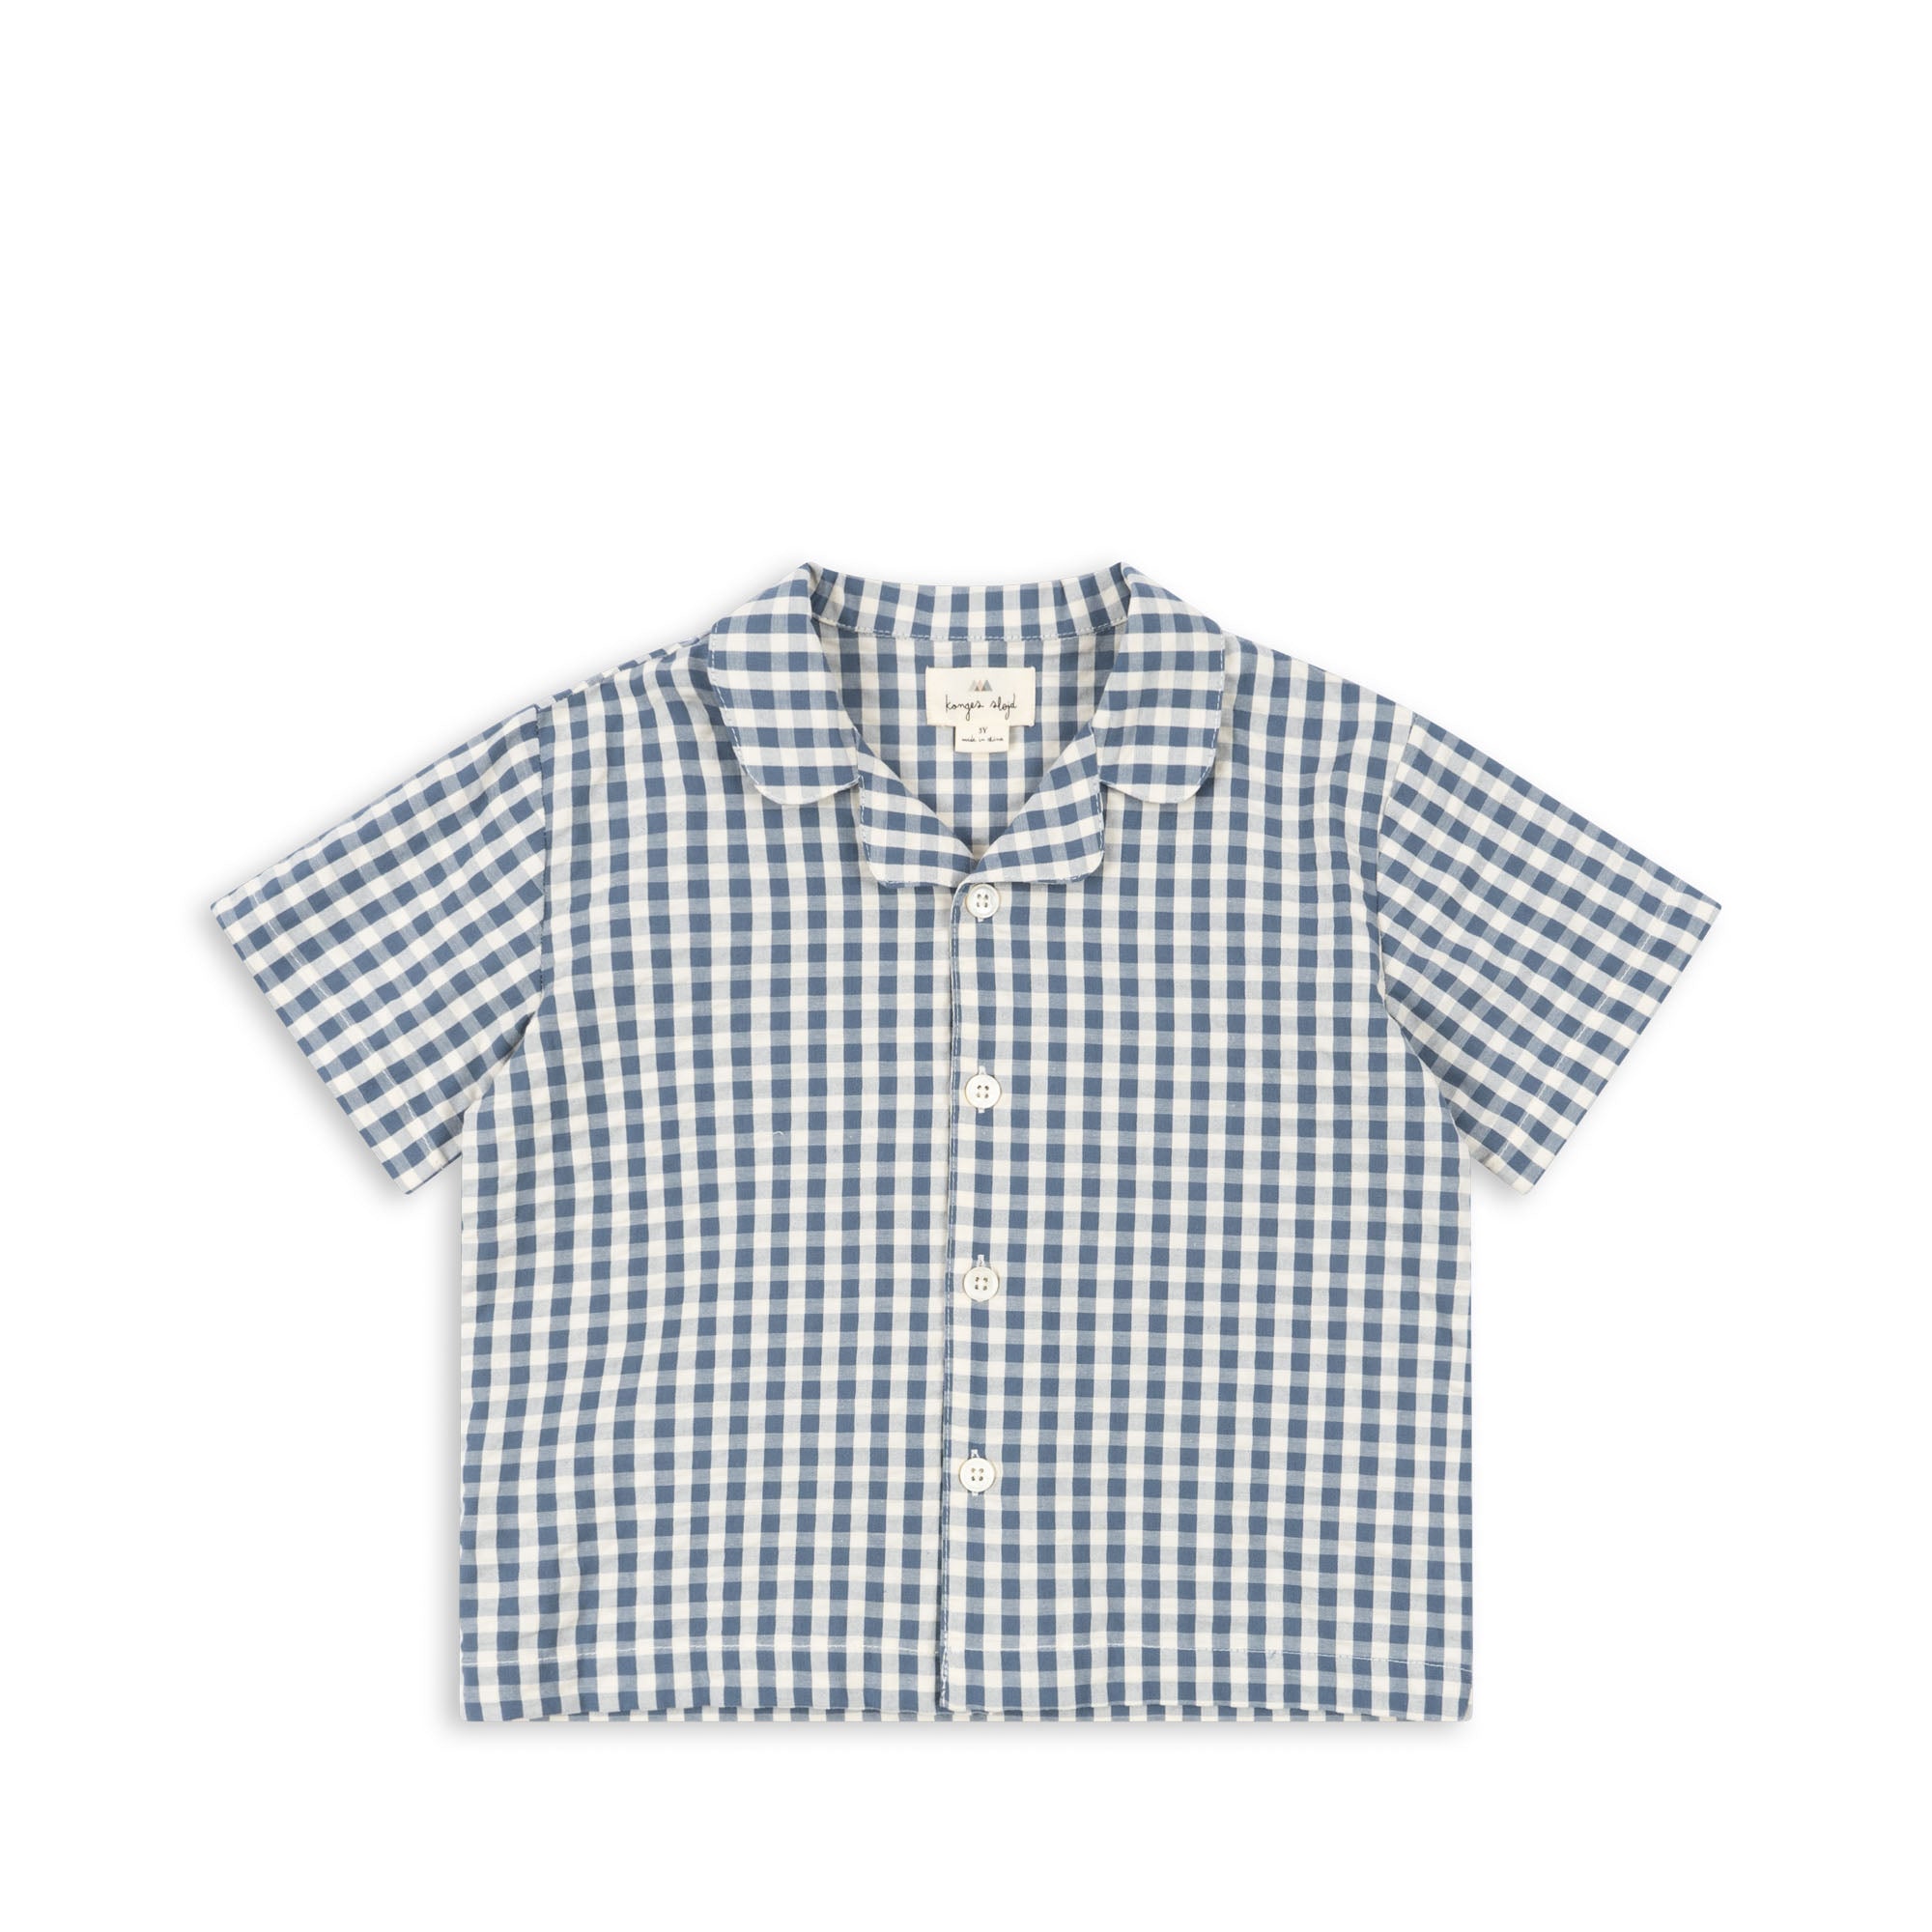 Konges Sløjd A/S KIM SS SHIRT Blouses with short sleeves - Woven CAPTAINS BLUE CHECK